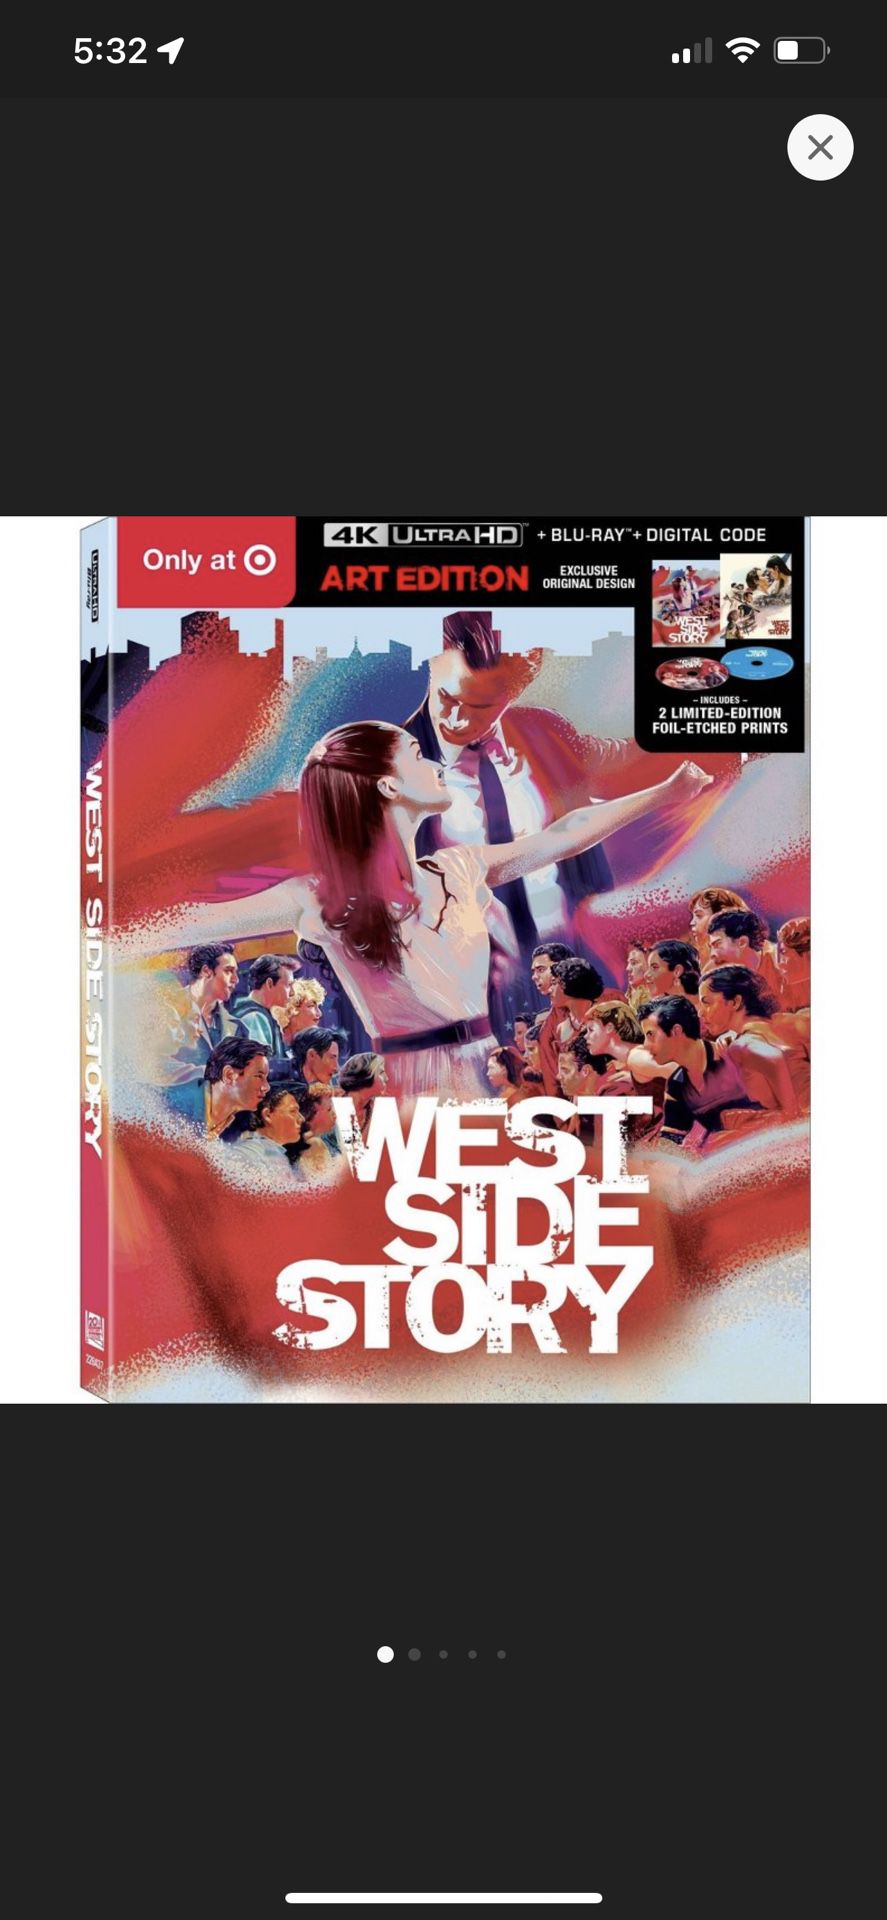 New, Factory Sealed-West Side Story Art Edition, includes 2 limited edition Foil Etched Prints 4K/UHD/Blu-Ray/Digital Code 